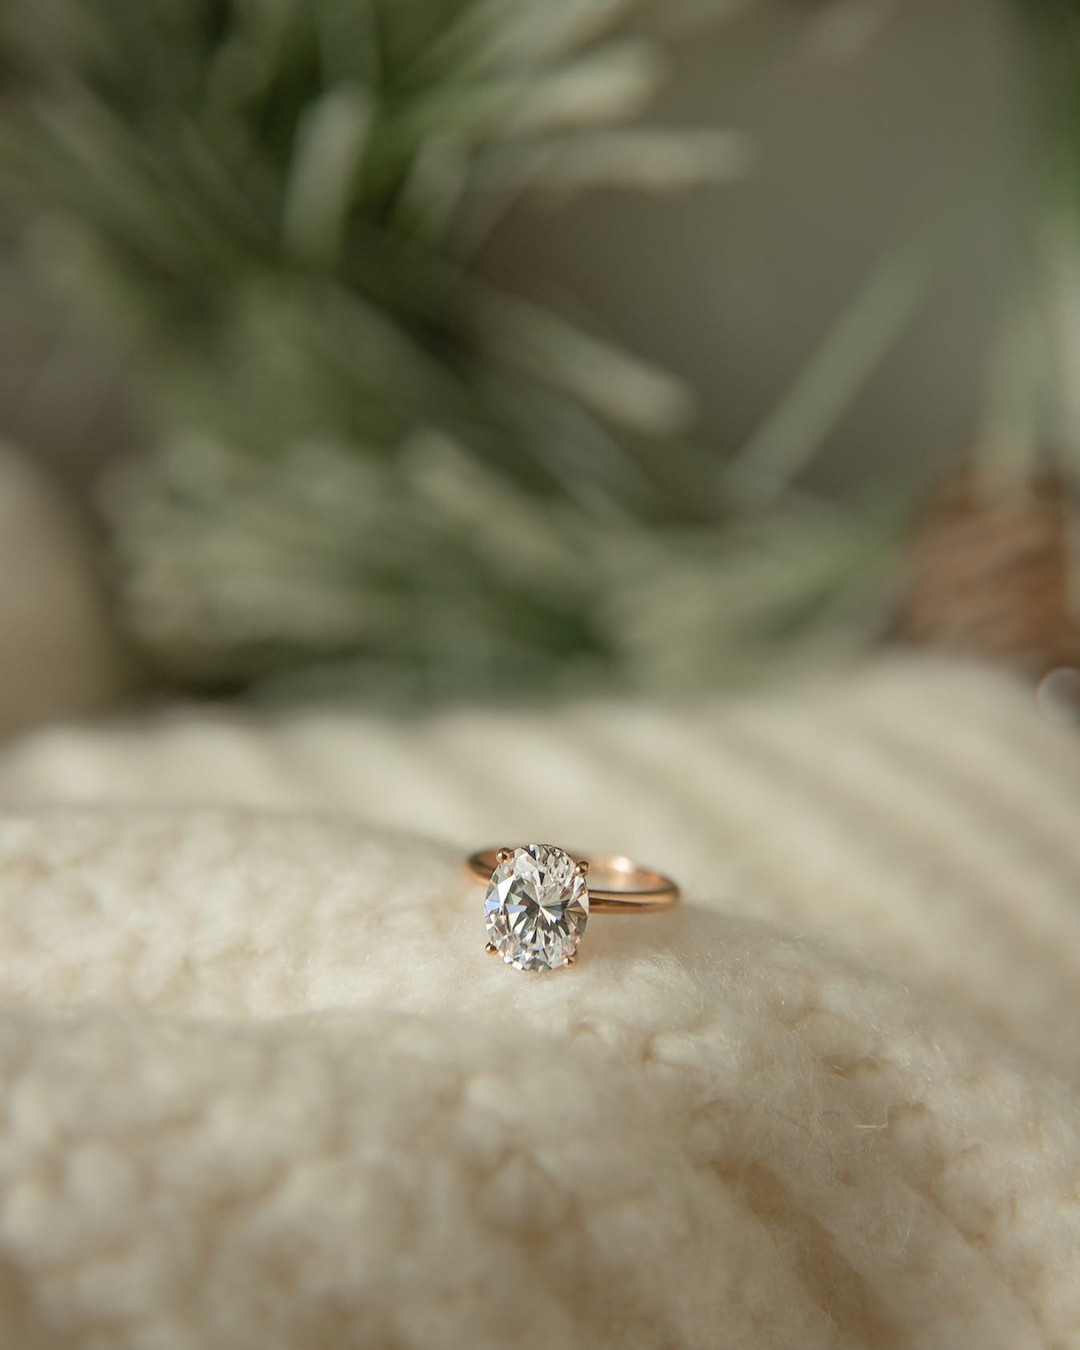 The perfect cozy sweater accessory 💍
💍ring: Timeless Solitaire, Adorned Basket Engagement Ring
.
.
.
#jamesallen #jamesallenrings #diamond #diamonds #diamondring #engaged #engagement #engagementring #isaidyes #ringinspo #holidayseason #winter #winterstyle #winterengagement